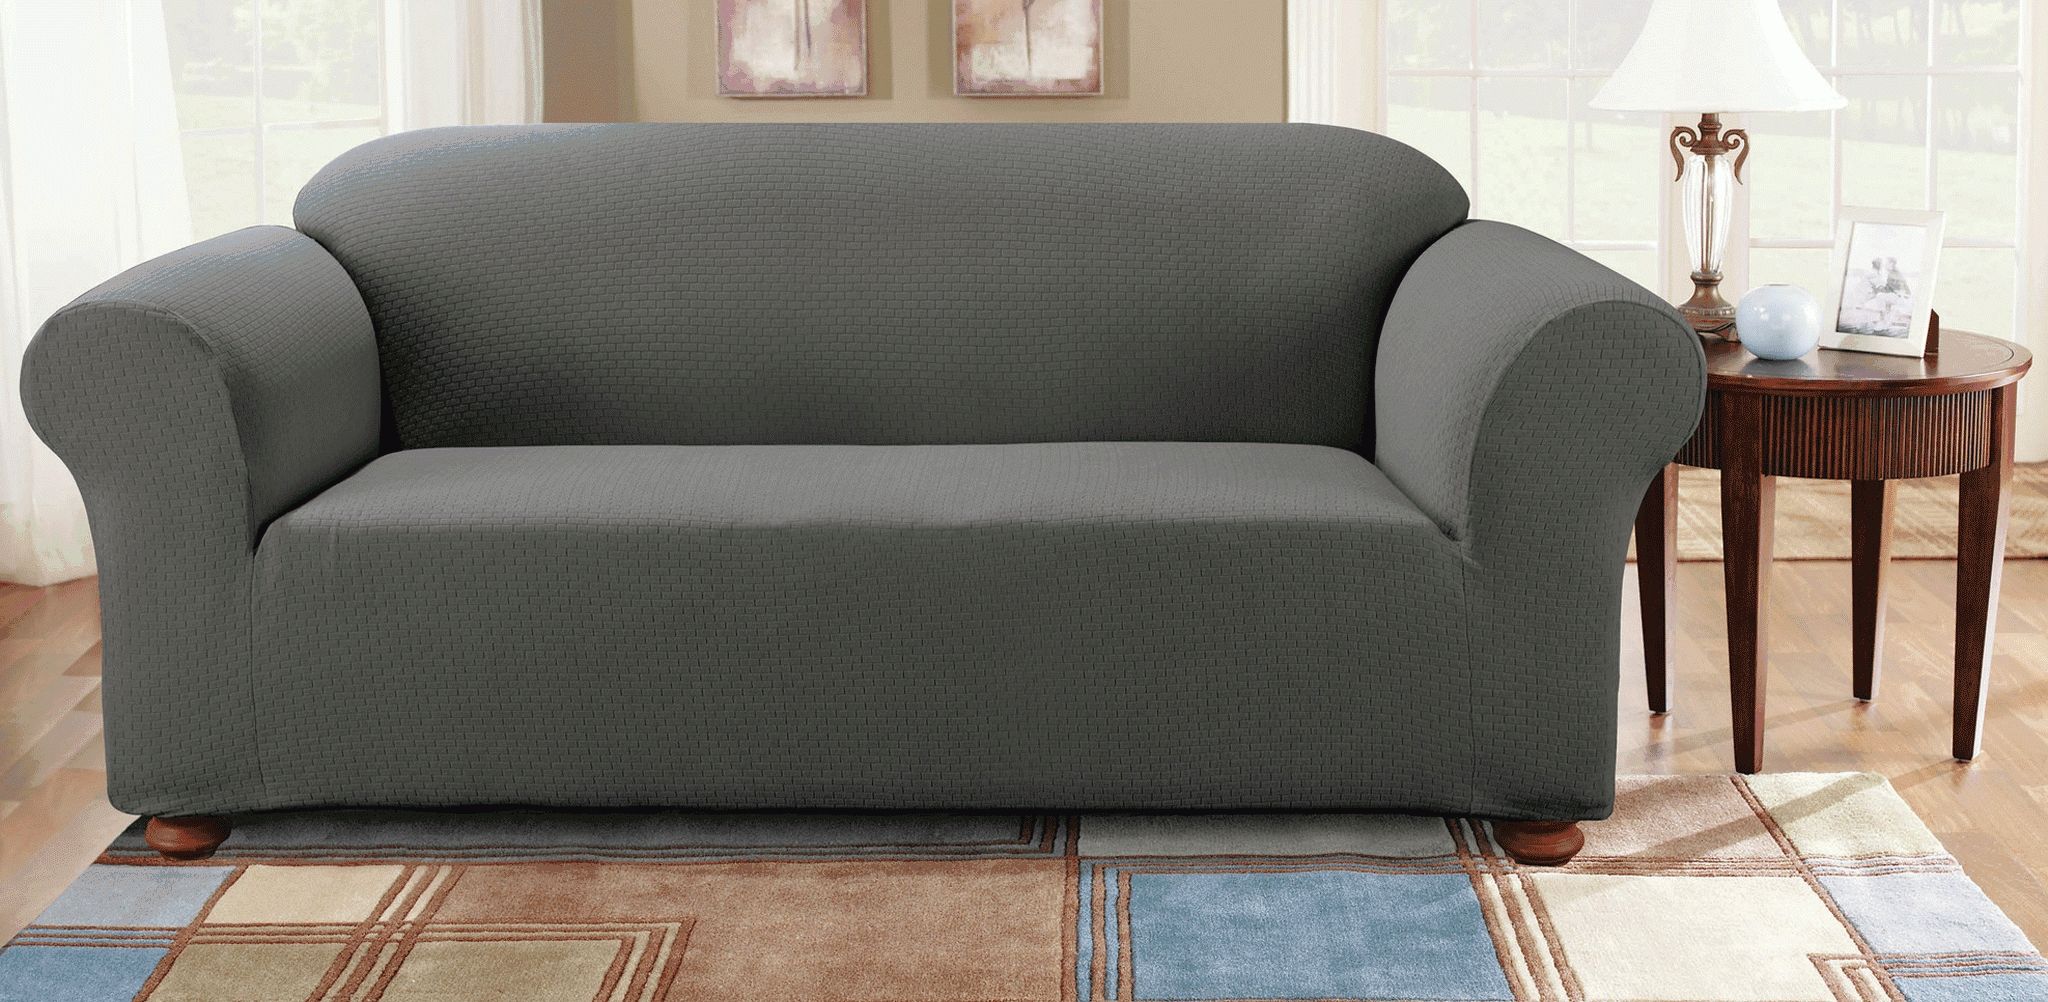 Furniture: Oversized Chair Slipcovers To Keep Your Furniture Clean Throughout Sofa And Chair Slipcovers (View 1 of 20)